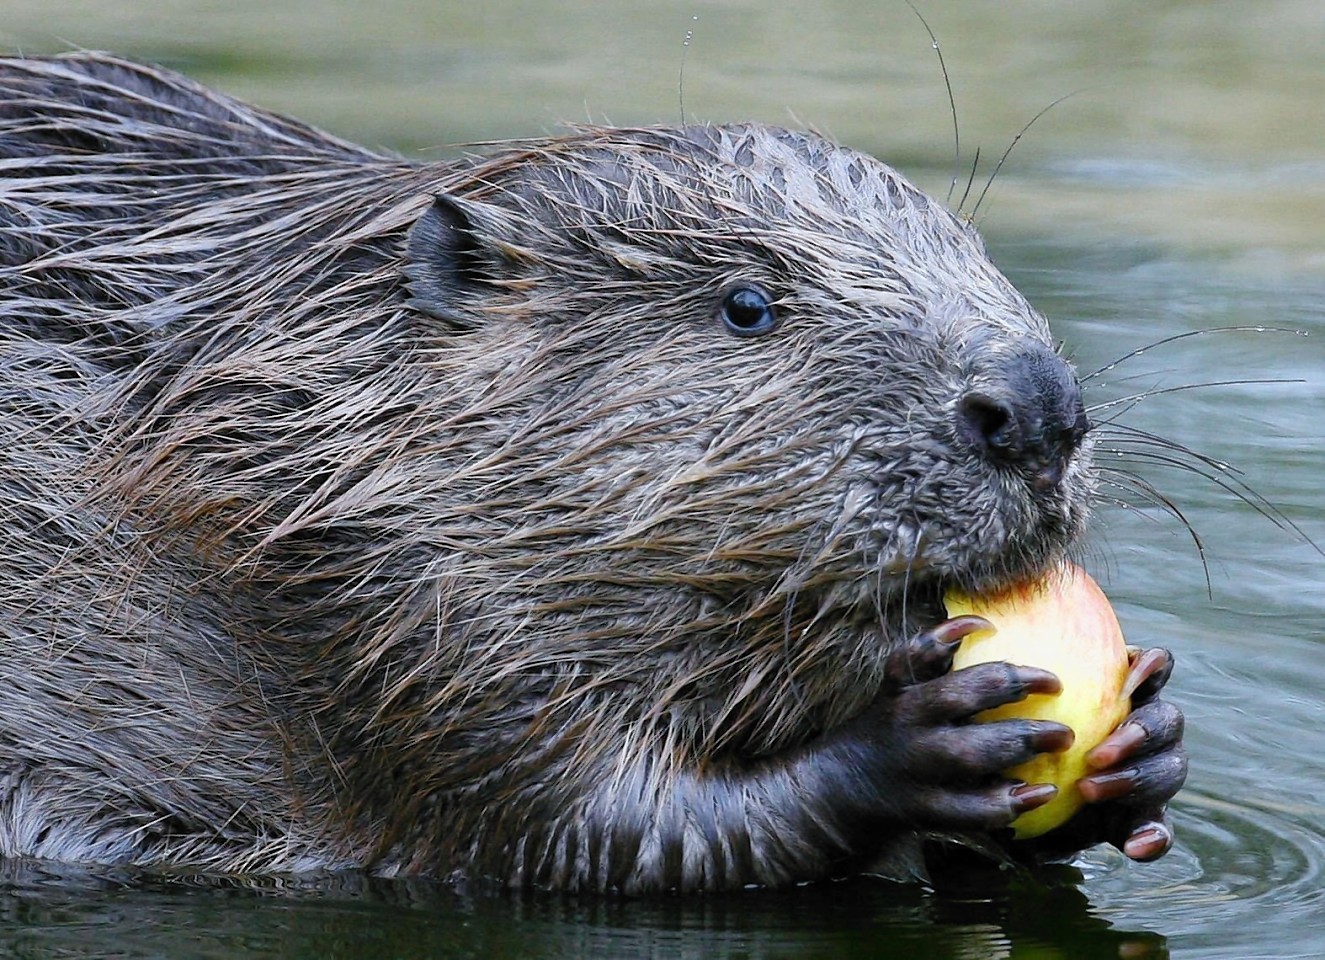 The Scottish Government are due to decide on whether Eurasian beavers will be allowed to live freely in Scotland after an absence of some 500 years